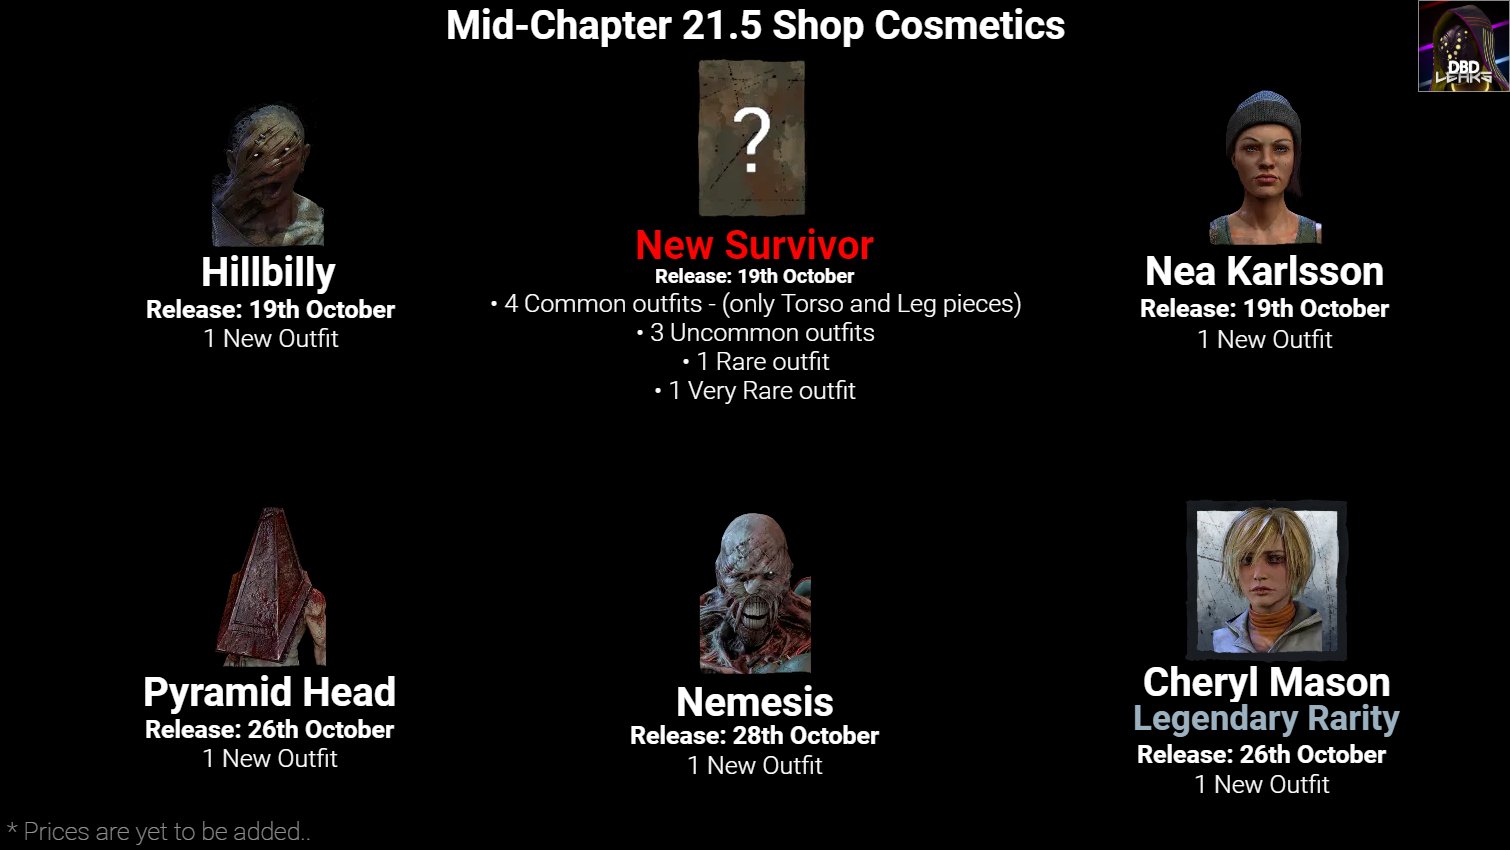 Dbdleaks Updated Info For 5 3 0 Shop Cosmetics Mid Chapter 21 5 Ptb Release 28th September Mid Chapter 21 5 Live Release 19th October Reminders Chapter 21 Releases On 7th September